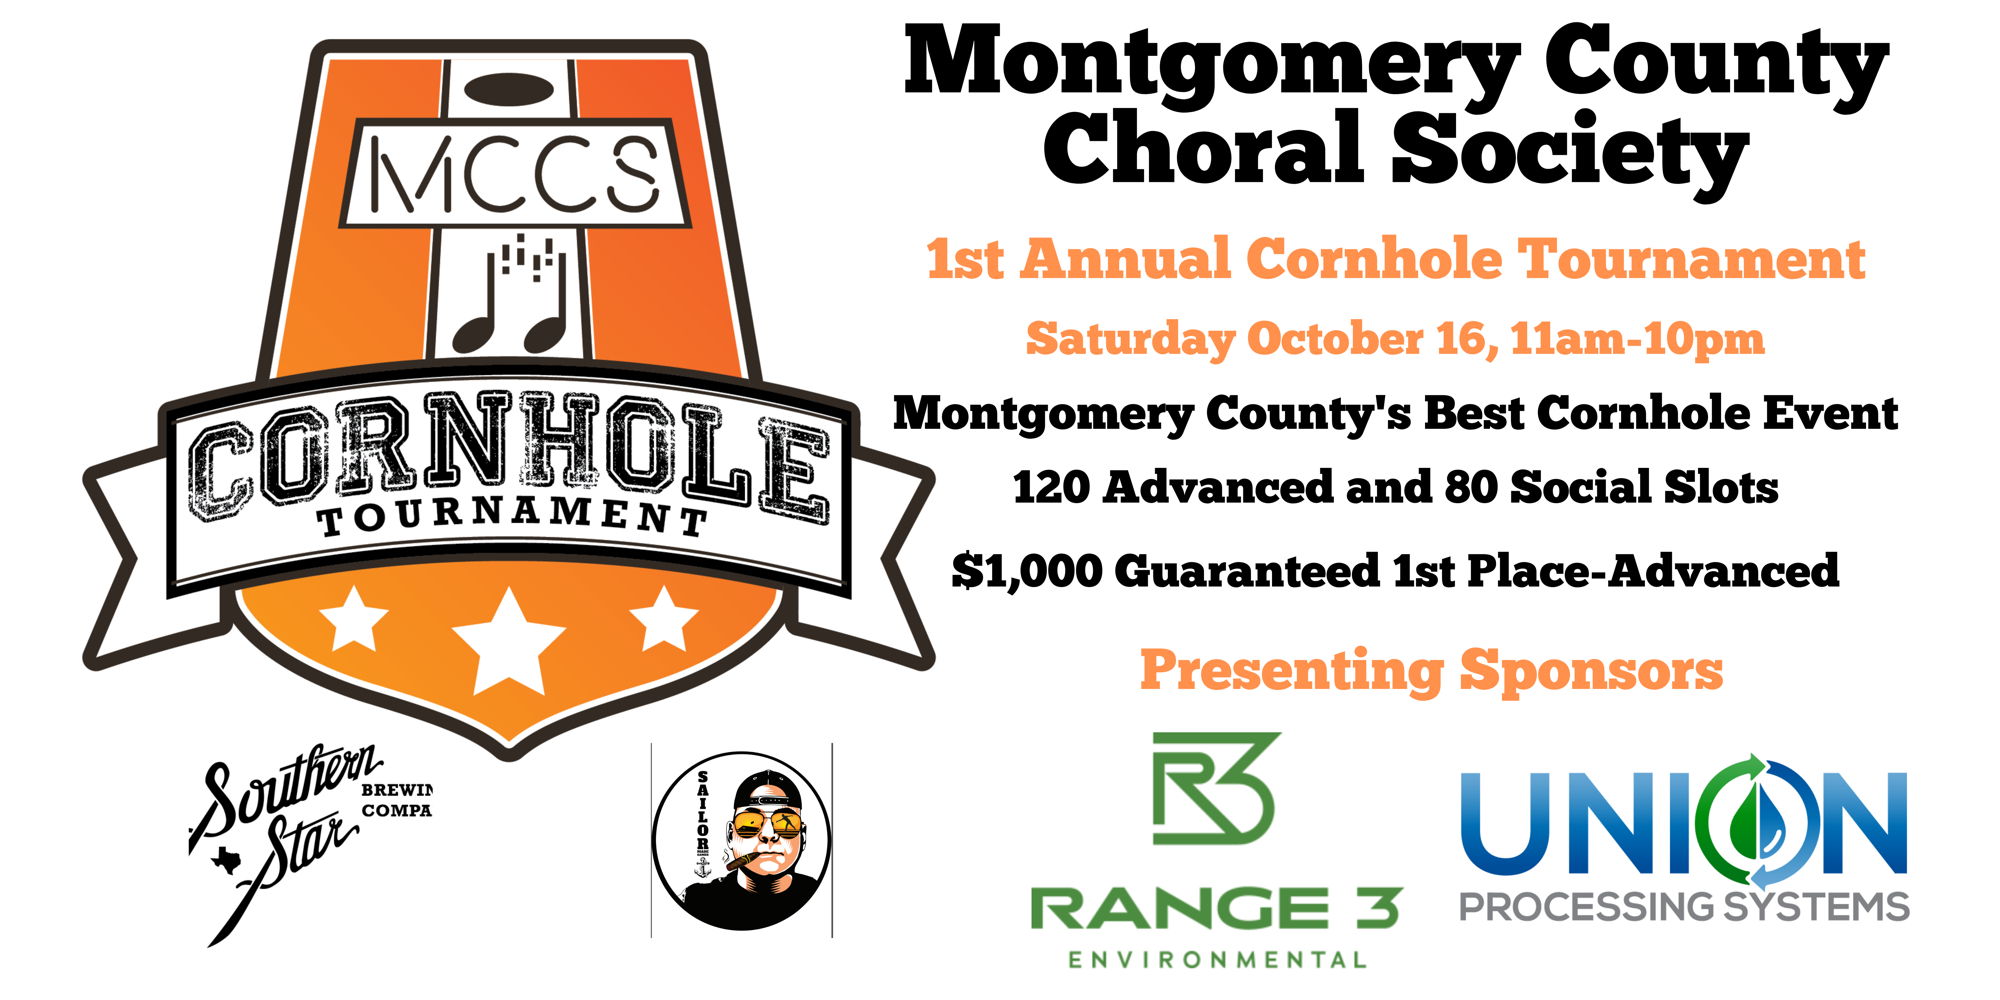 1st Annual Montgomery County Choral Society Cornhole Tournament promotional image